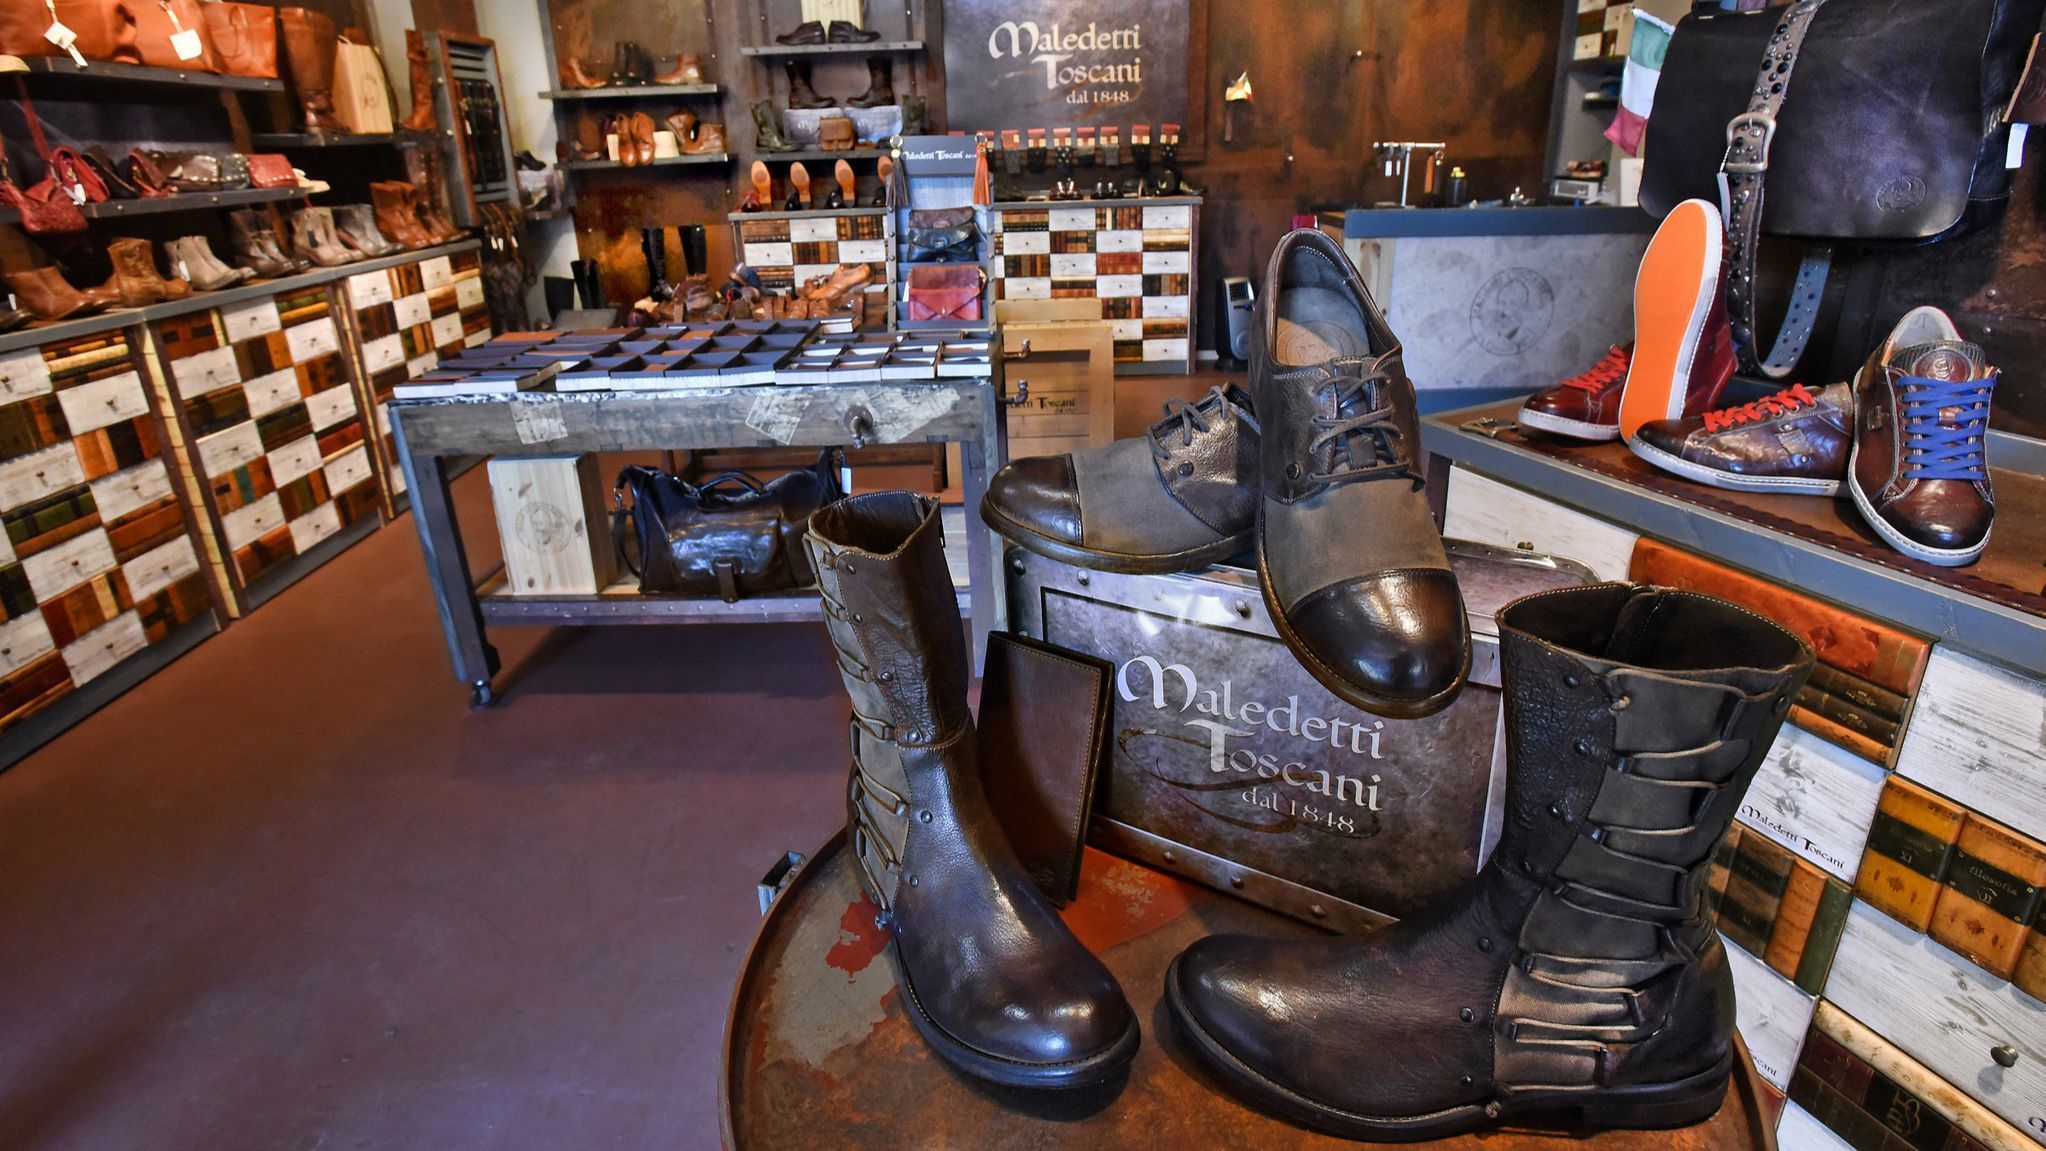 Maledetti Toscani, a Greenspring Station shop specializing in imported shoes and leather goods made